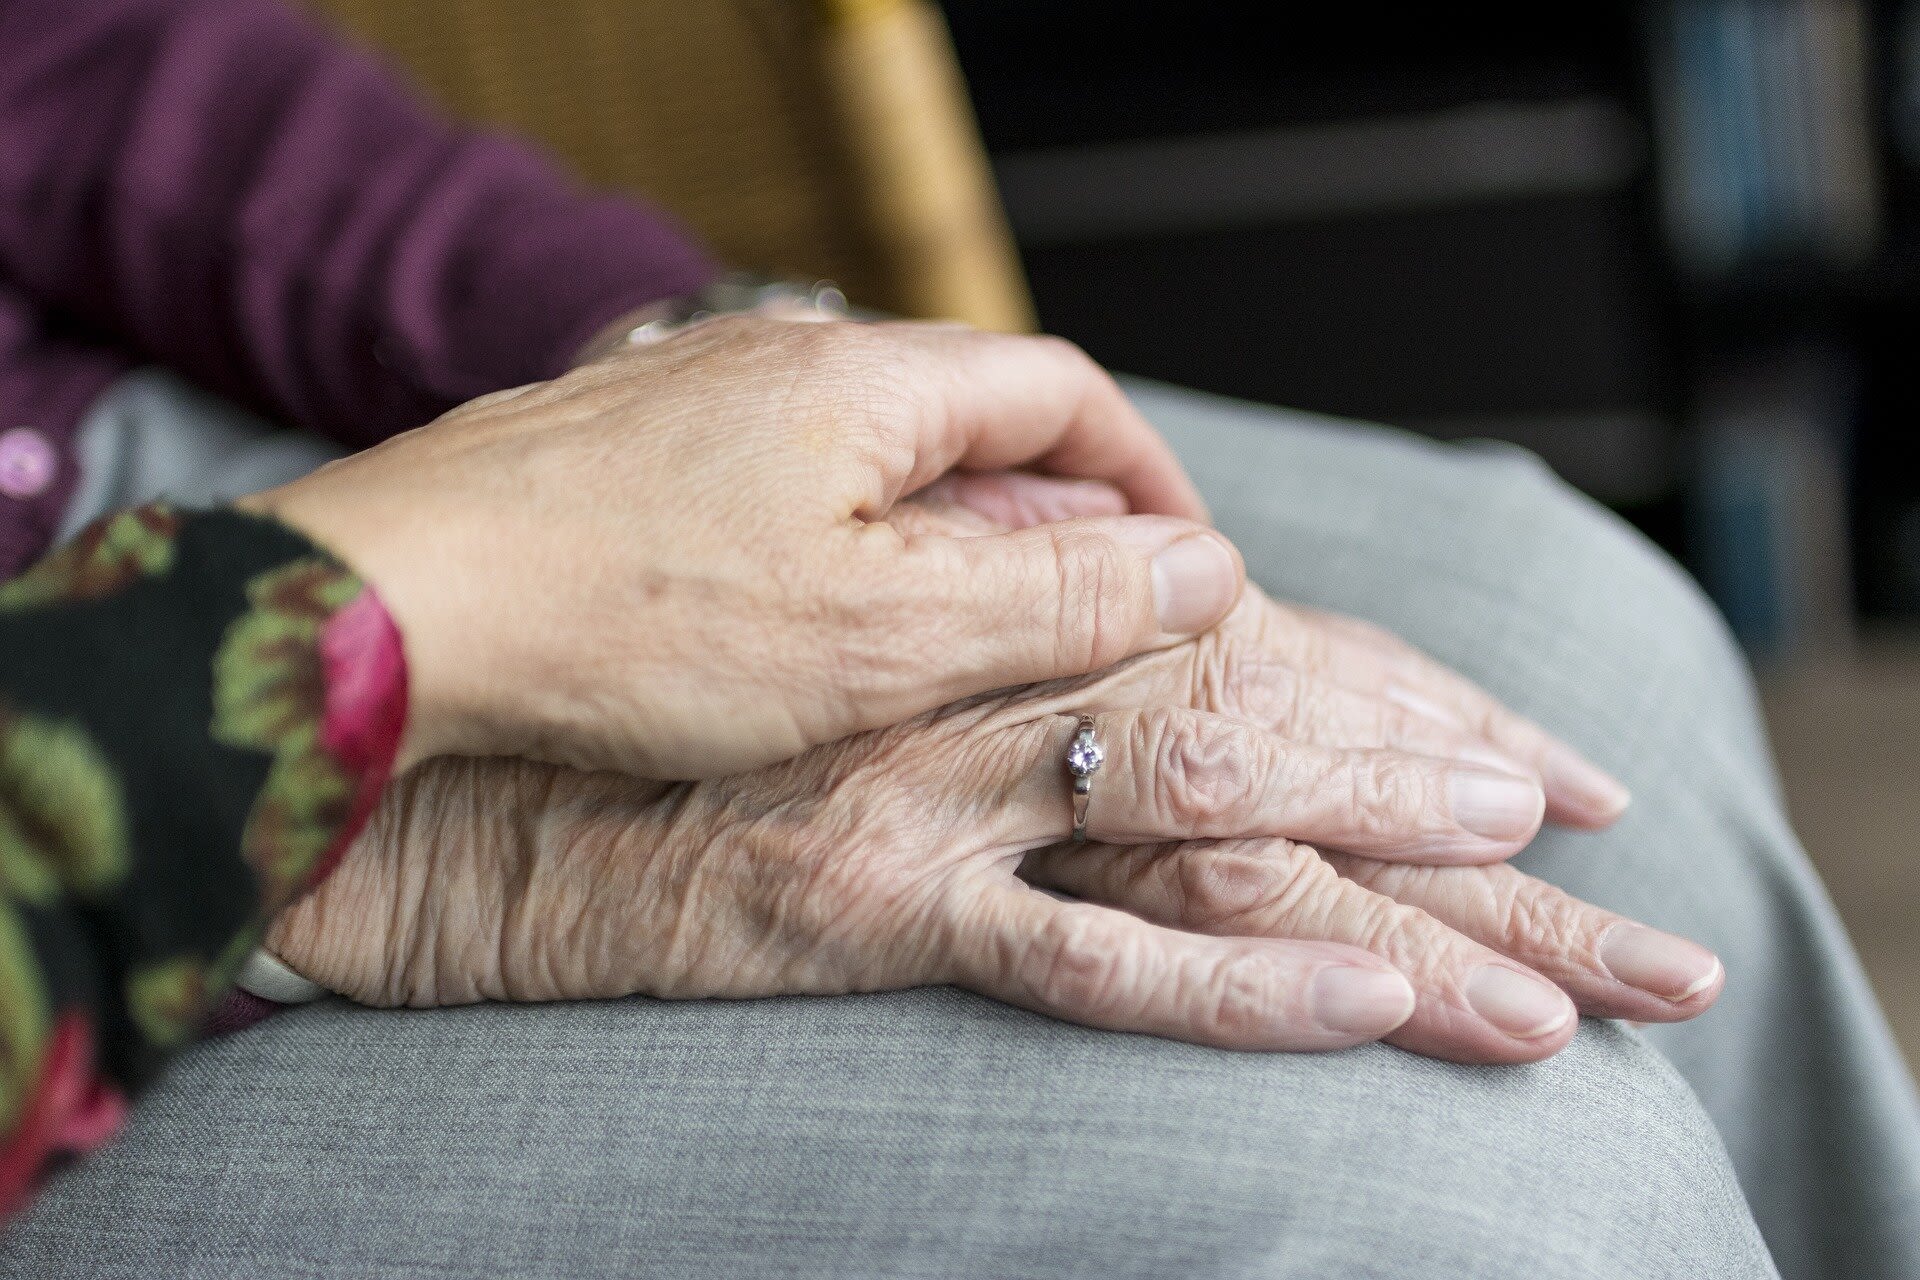 National trial safely scales back prescribing of a powerful antipsychotic for the elderly